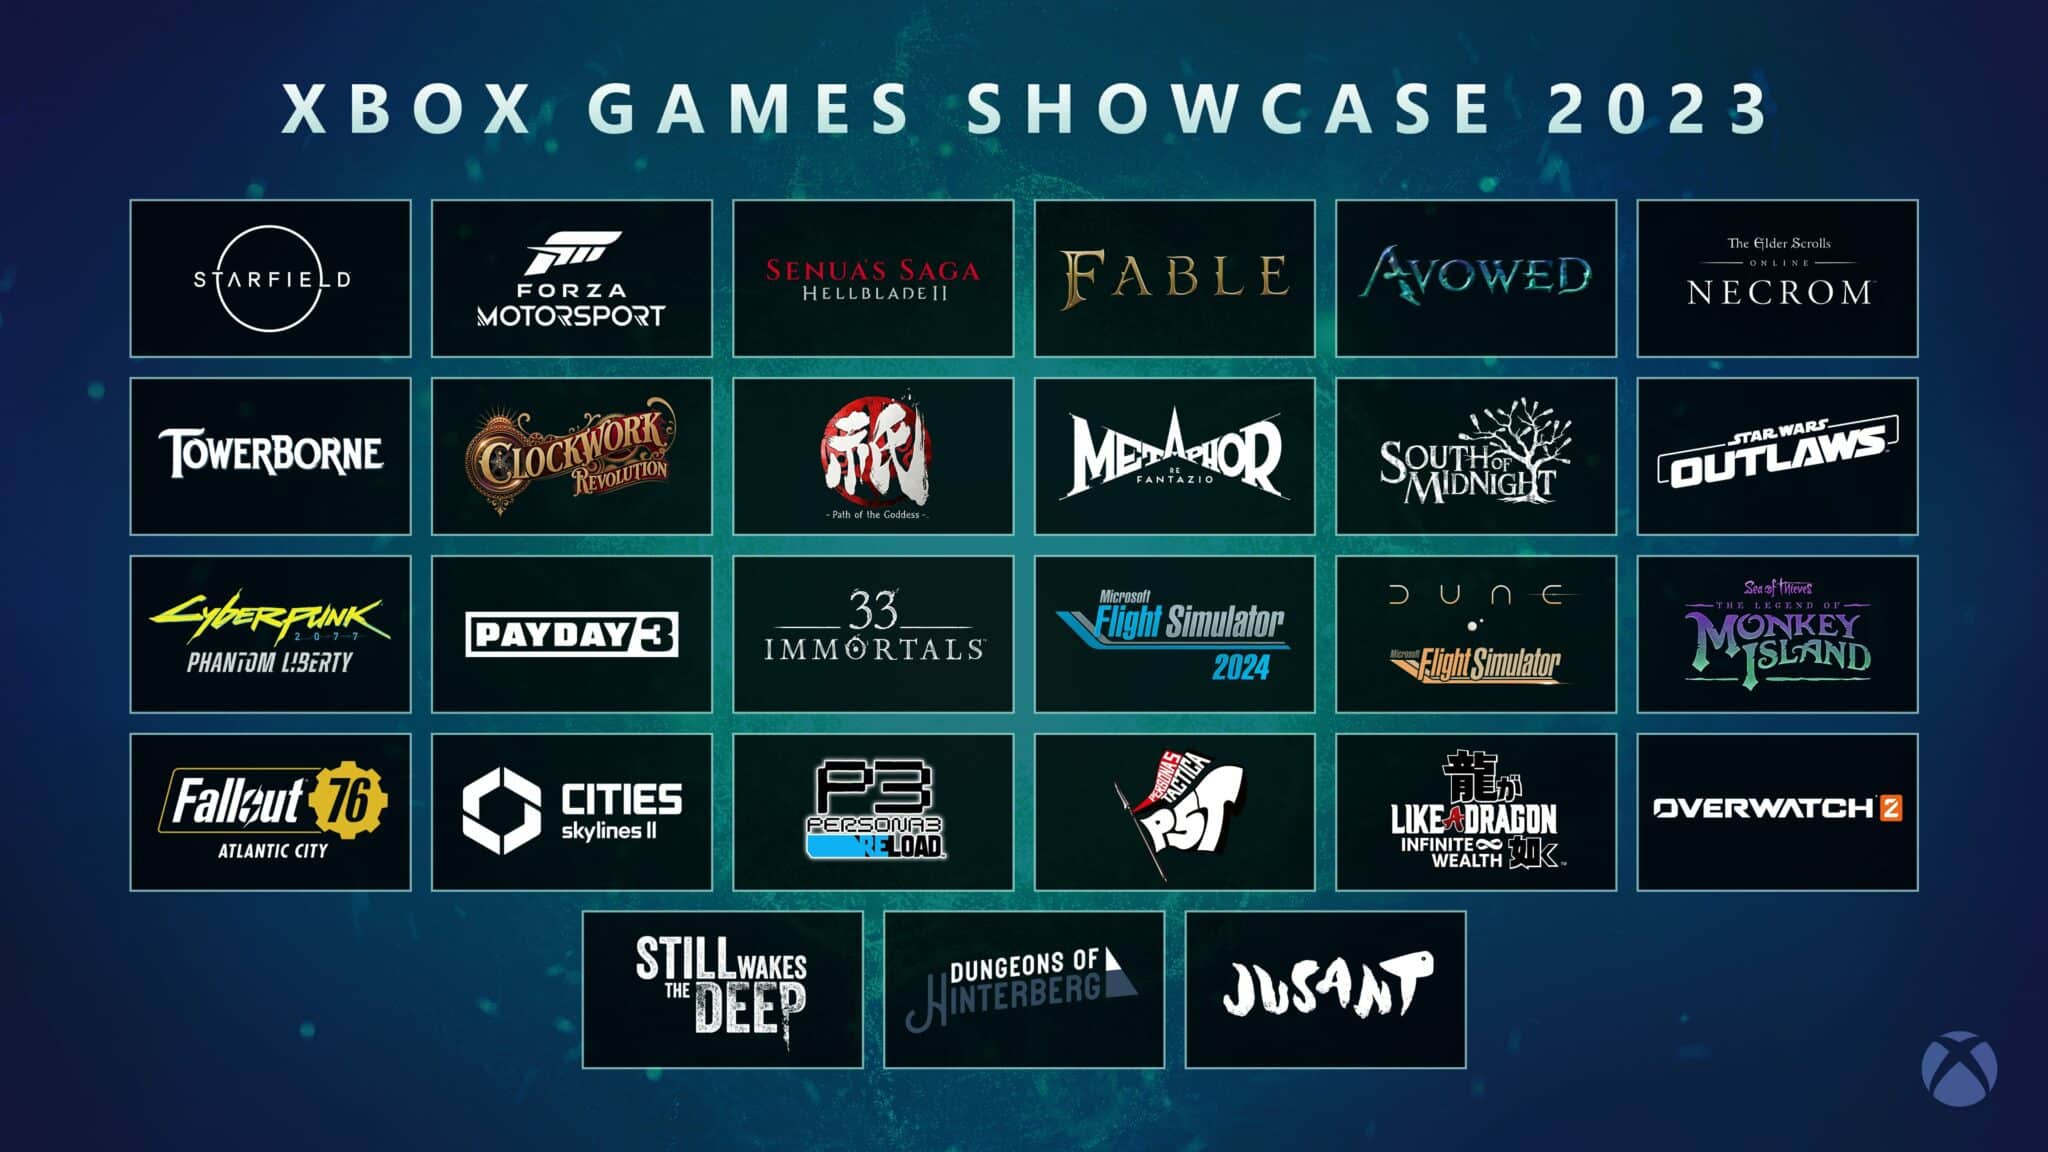 Recap of the Announcements from Xbox Games Showcase 2023 Hardware Times